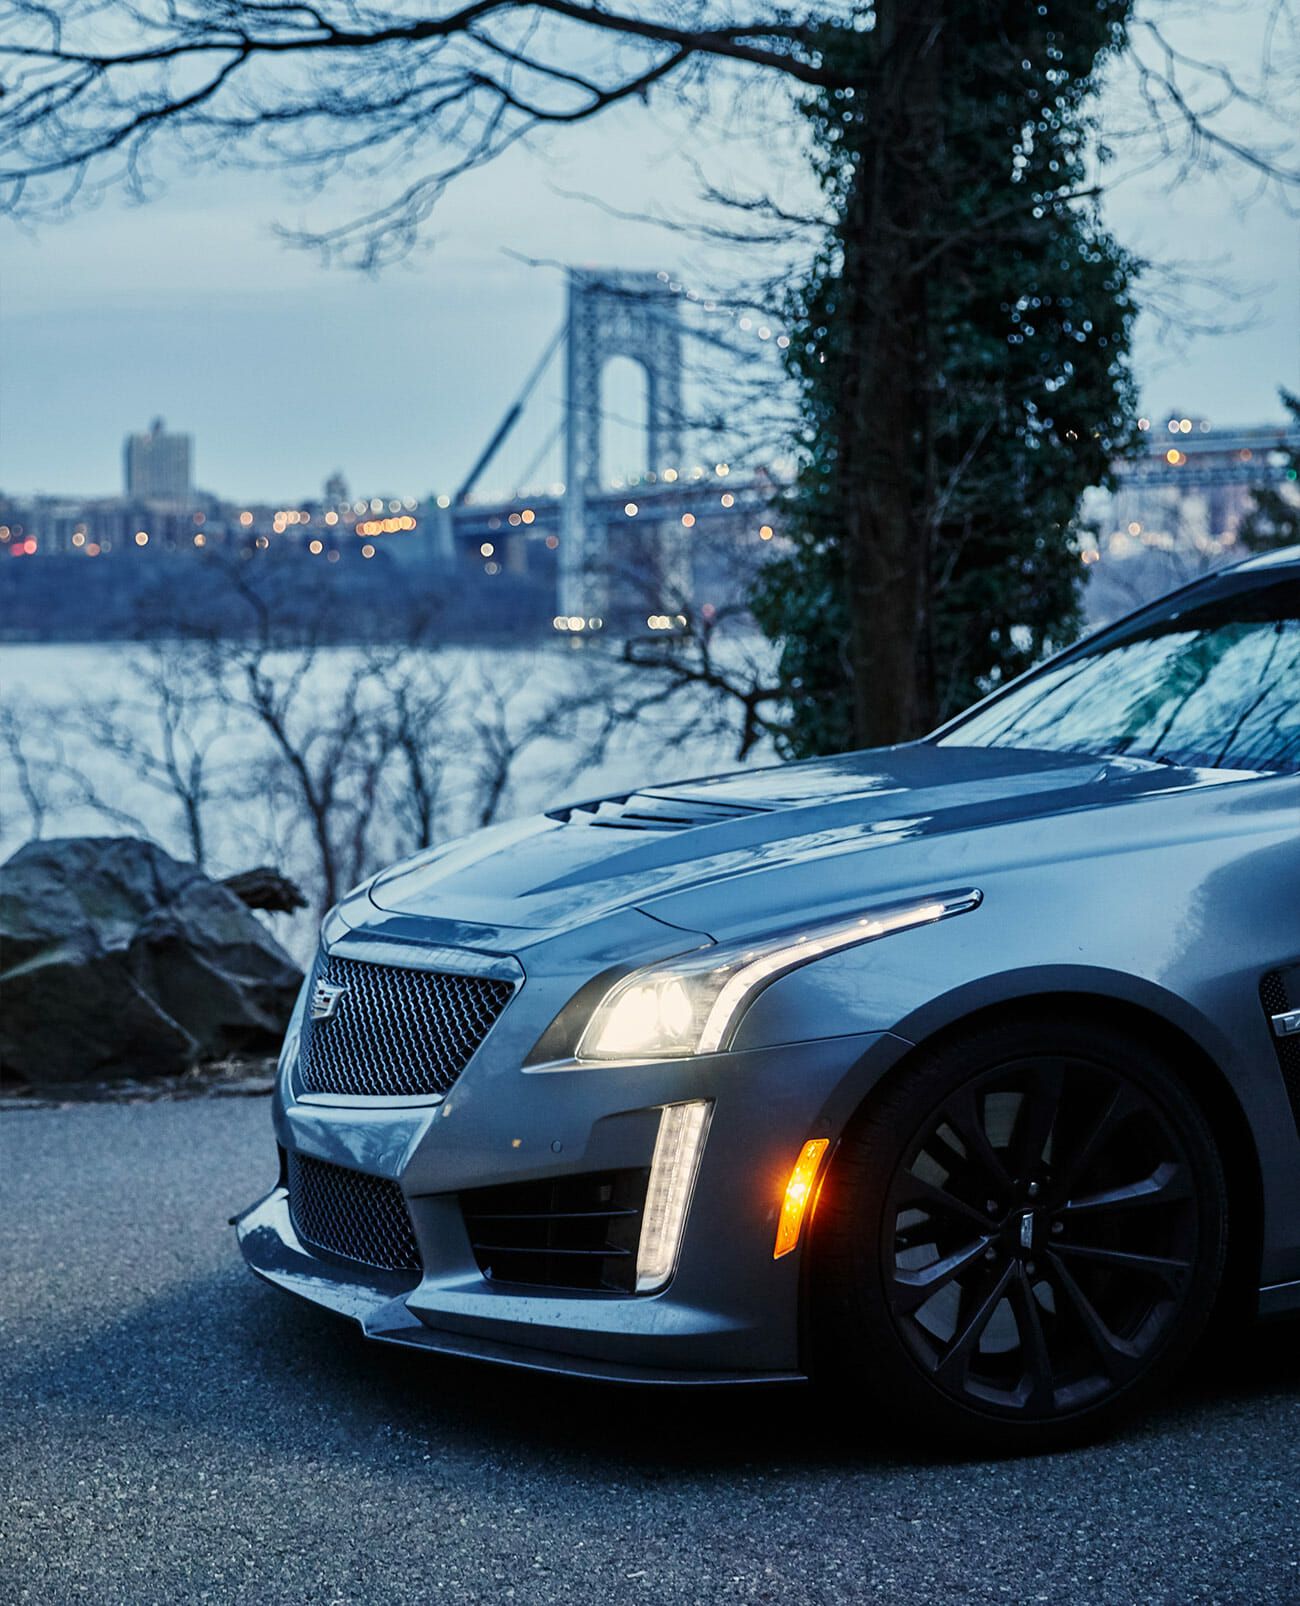 The 2019 Cadillac CTS-V Will Be One of the All-Time Greats